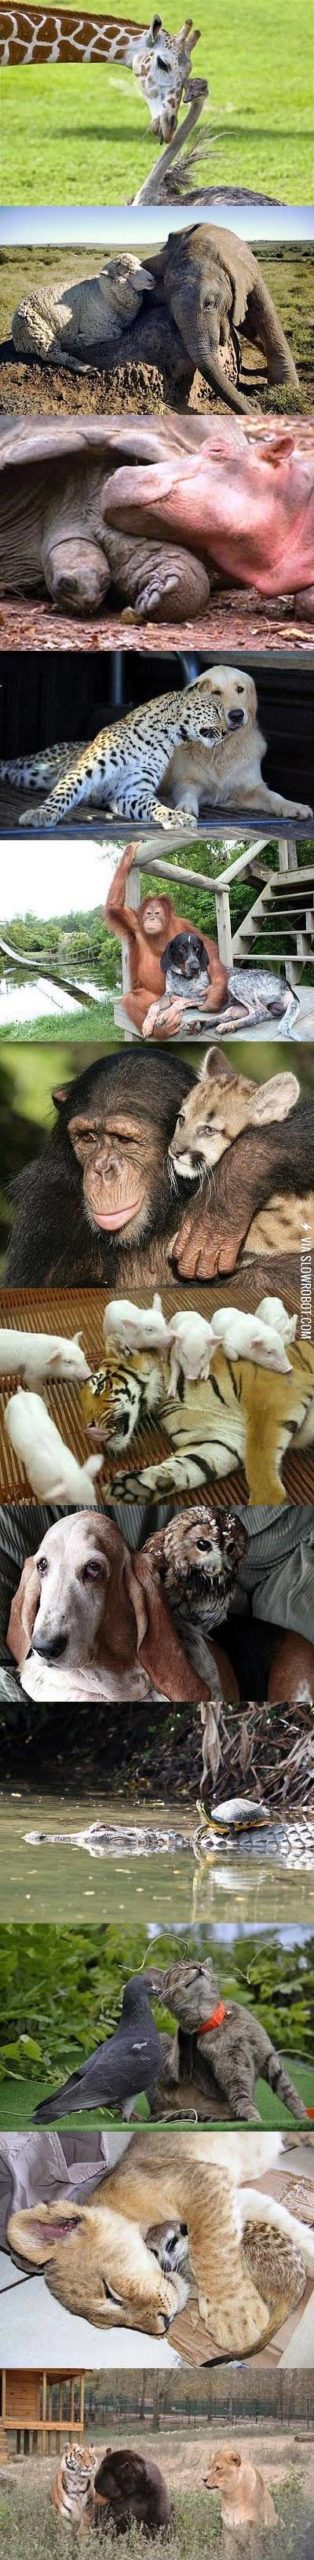 Animals+and+their+friends.